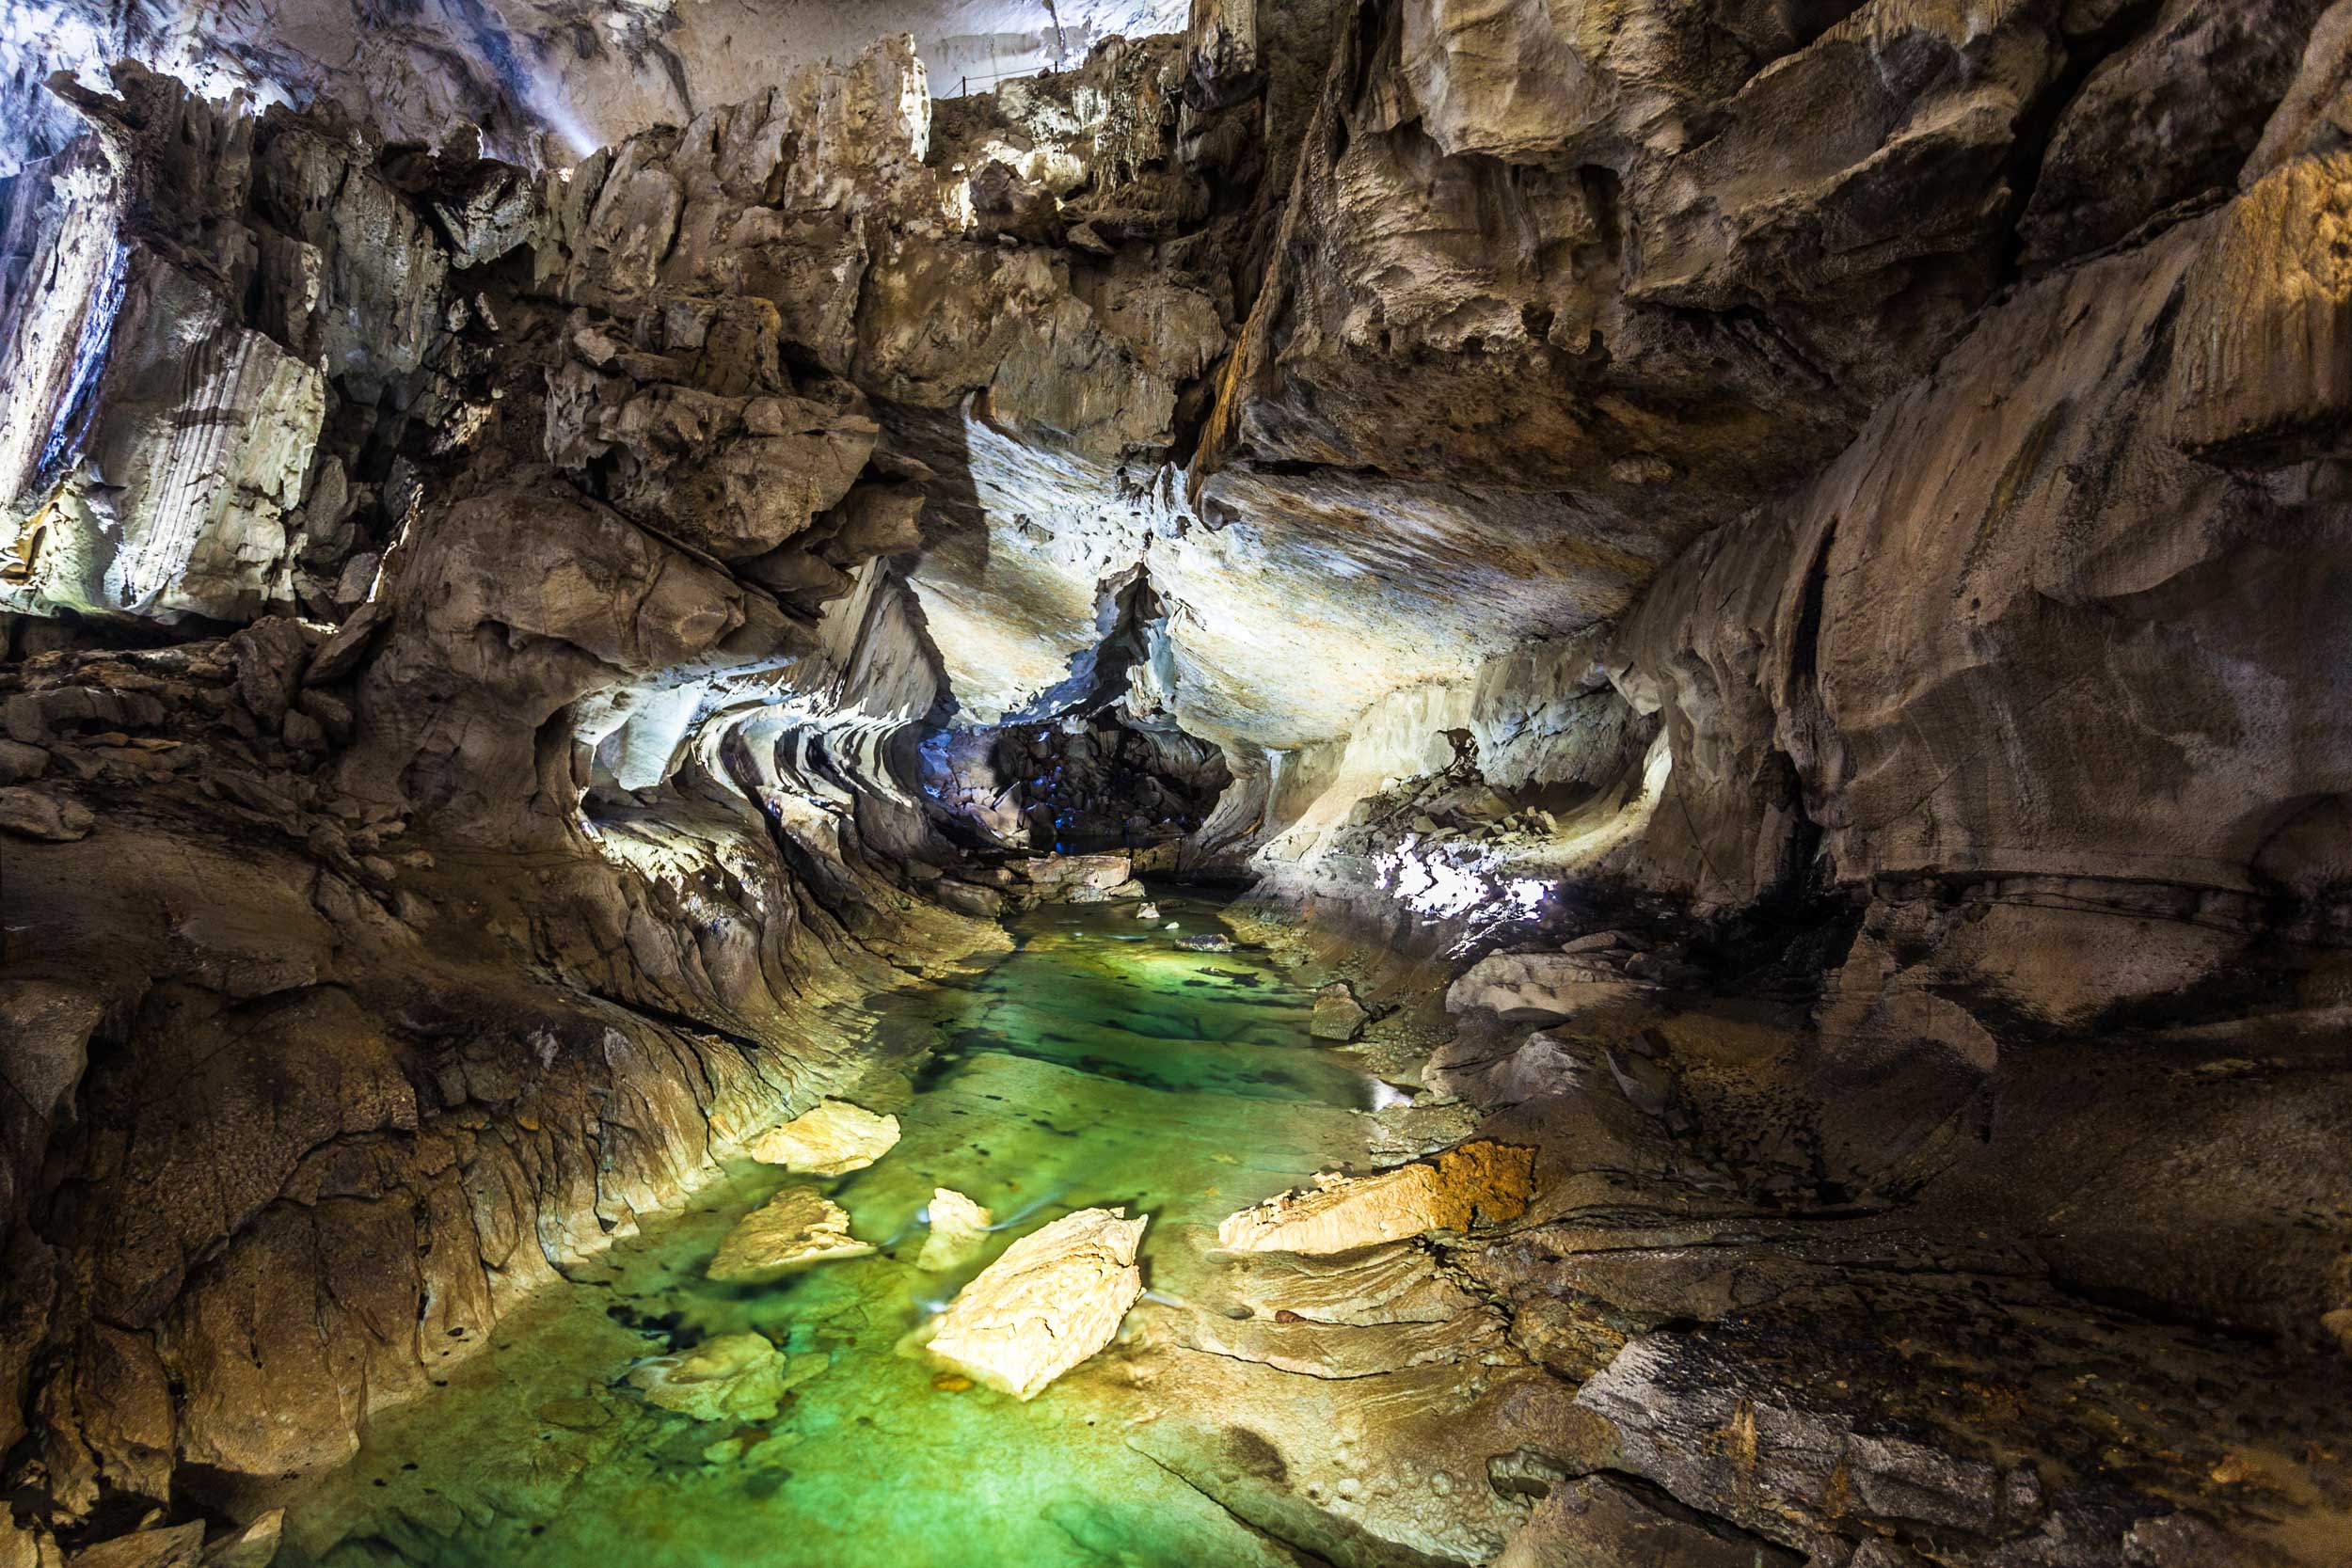 In a cave with a green river running through it in Borneo